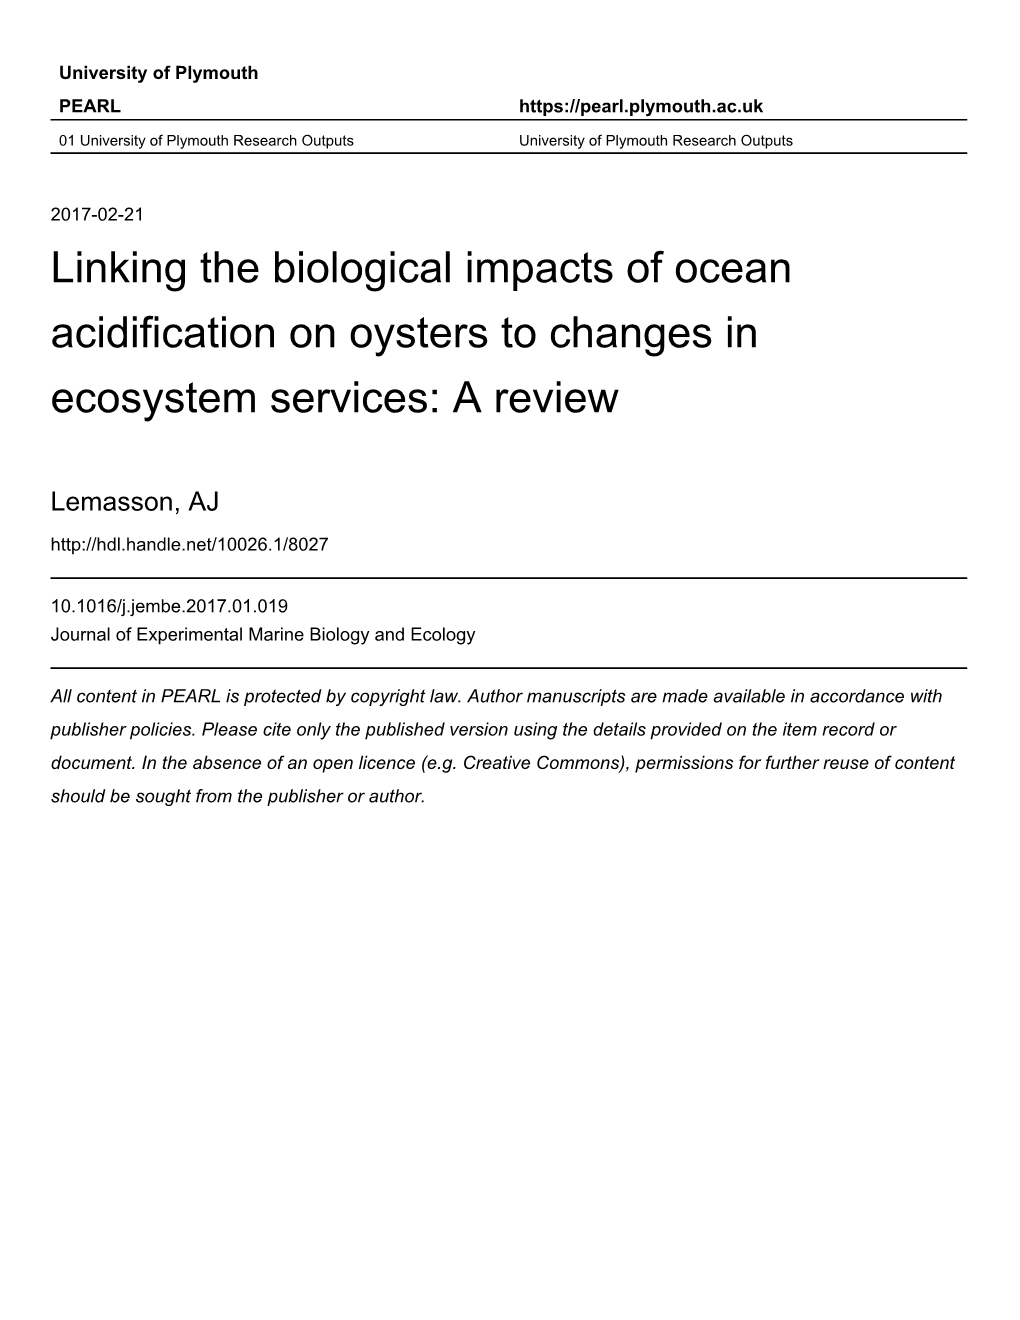 Linking the Biological Impacts of Ocean Acidification on Oysters to Changes in Ecosystem Services: a Review